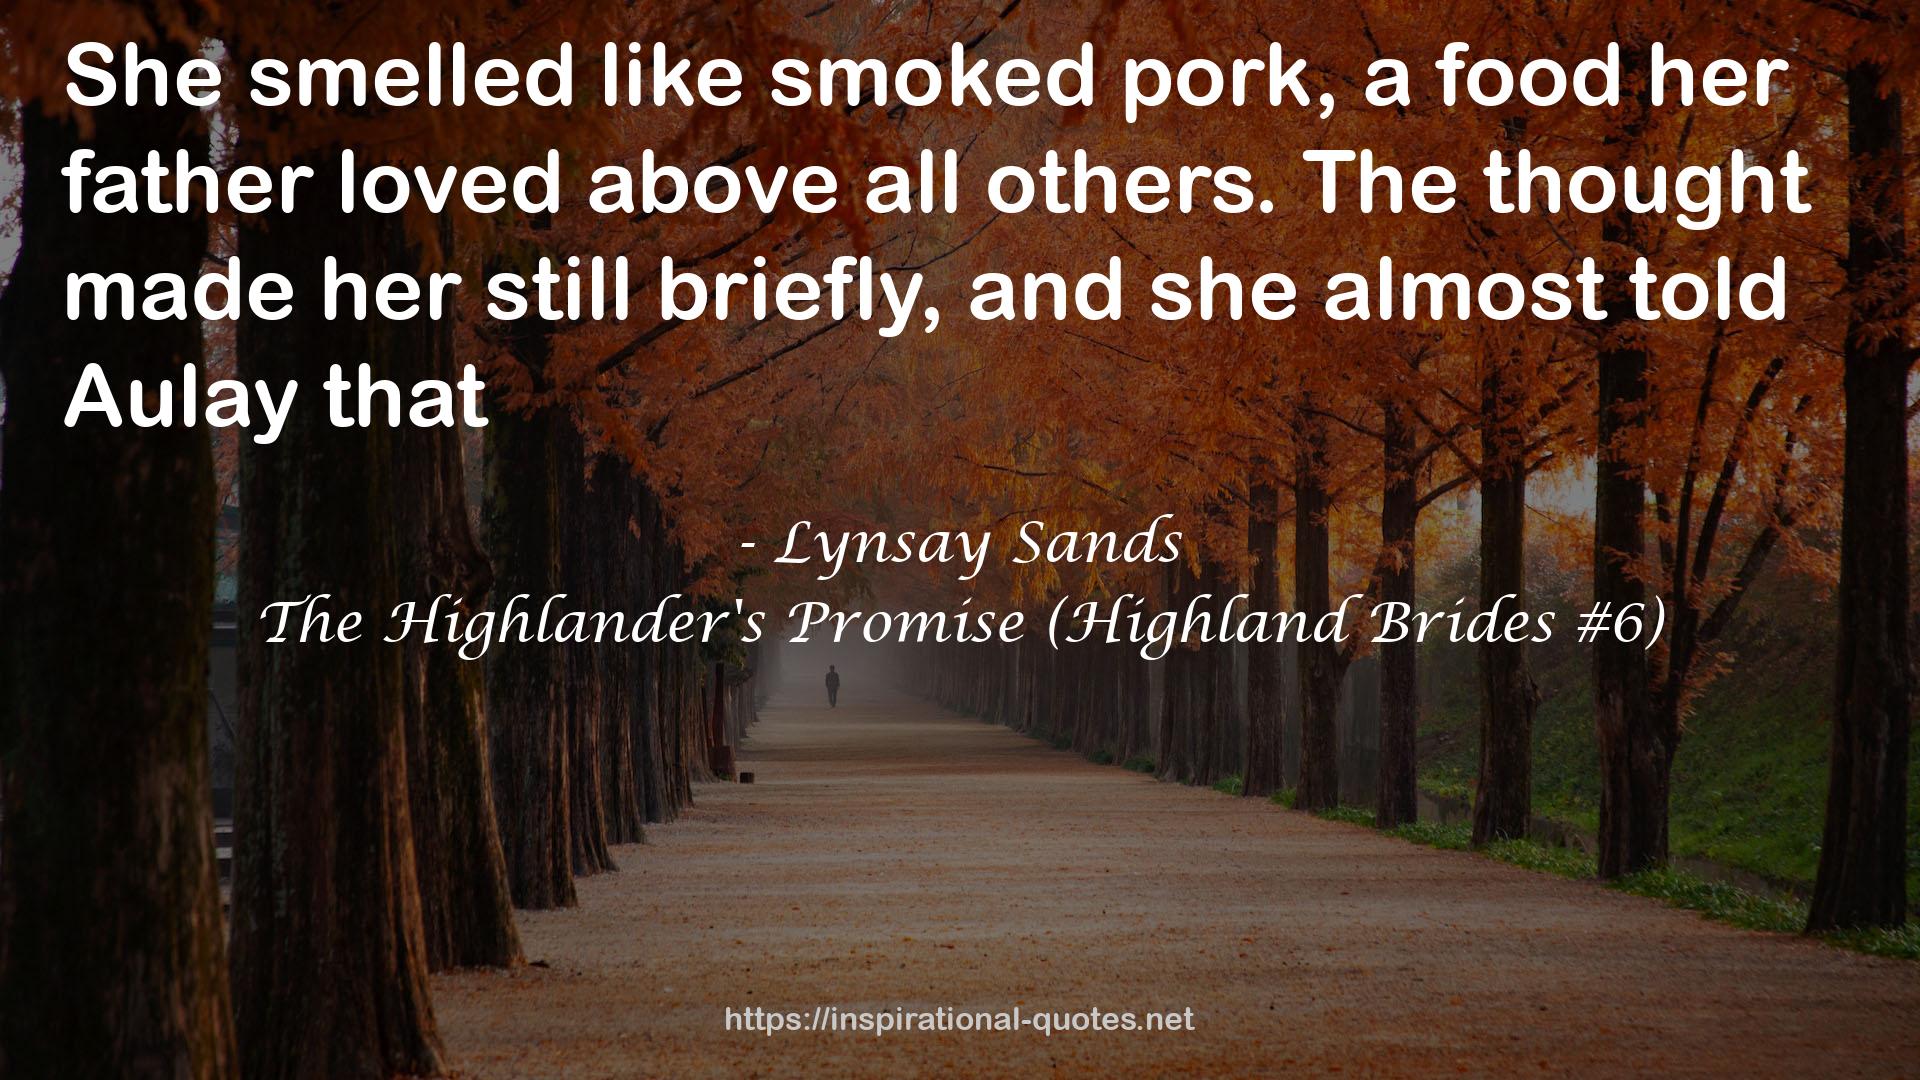 The Highlander's Promise (Highland Brides #6) QUOTES